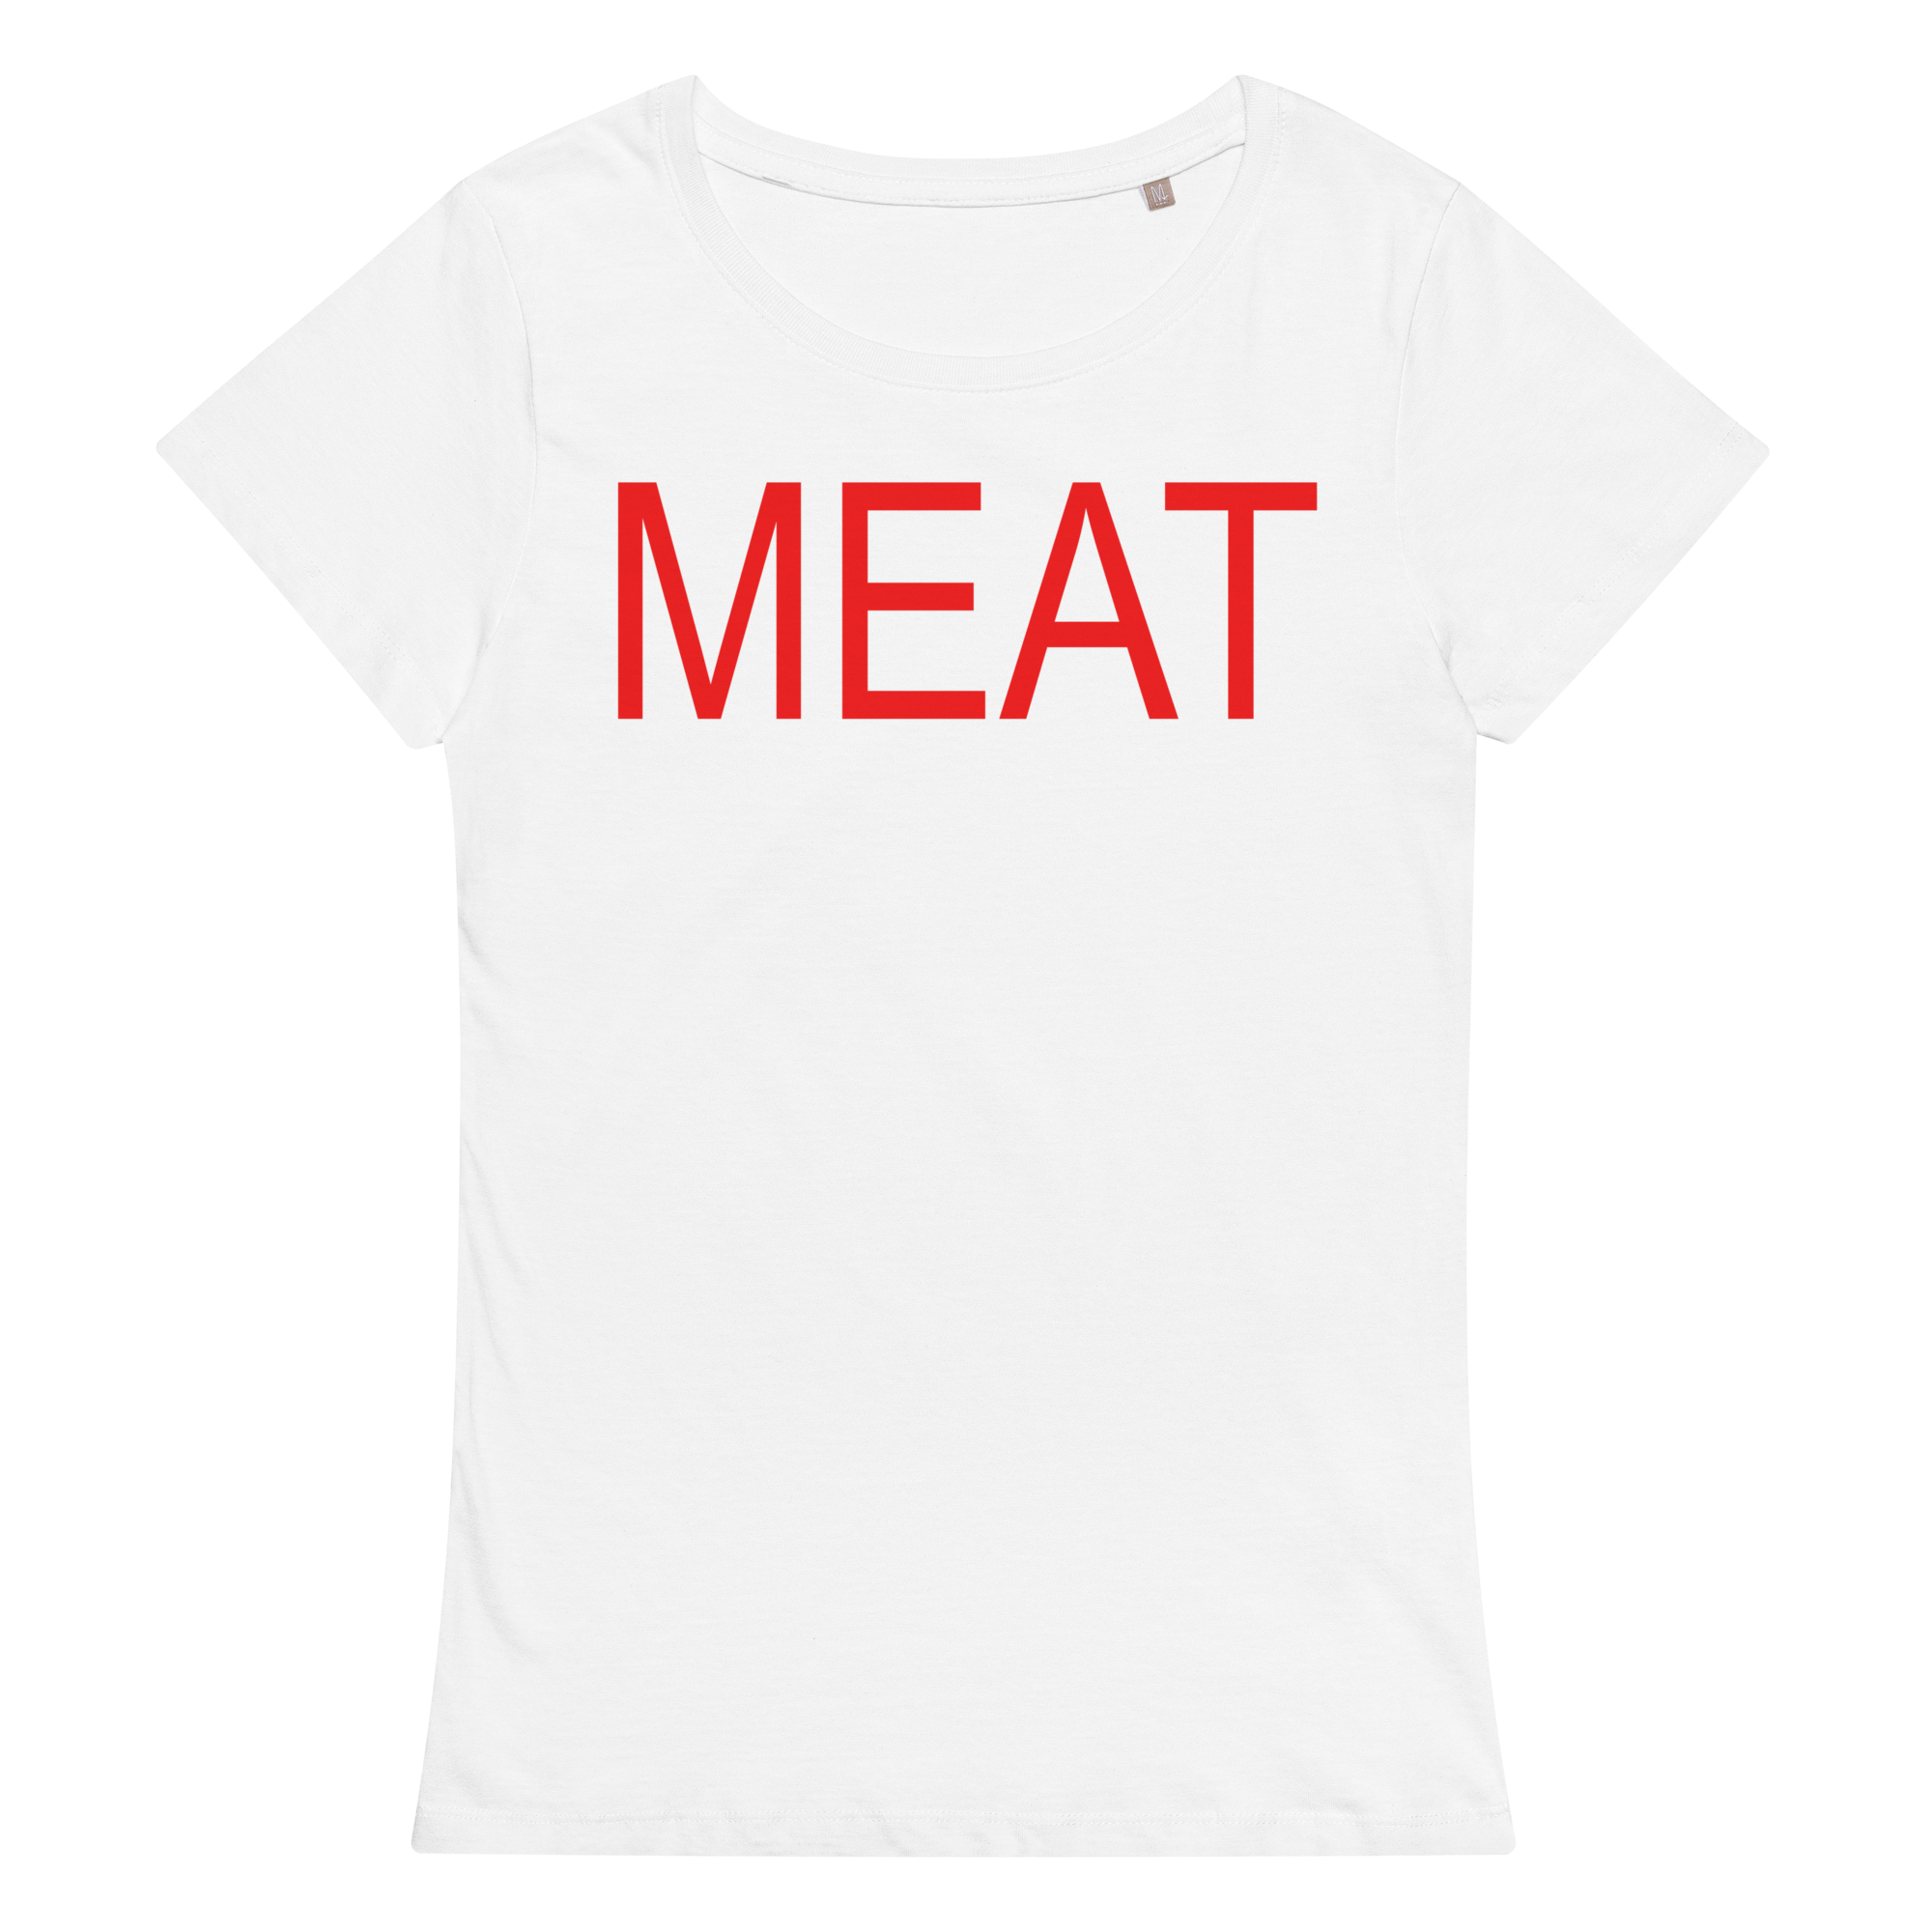 MEAT SHIRT (FITTED GIRLY STYLE)